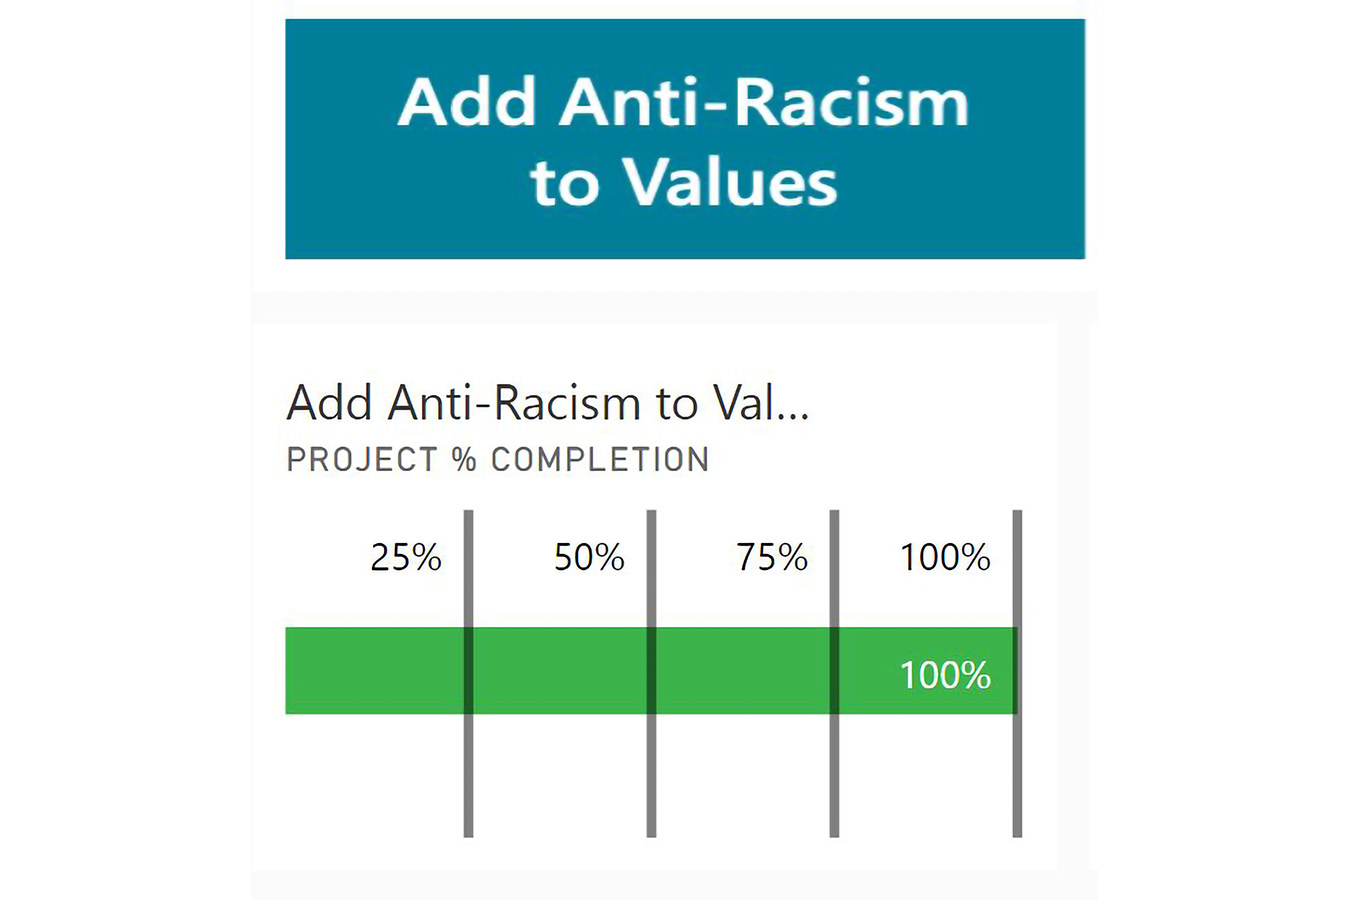 Add Anti-Racism to values is at 100% project completion